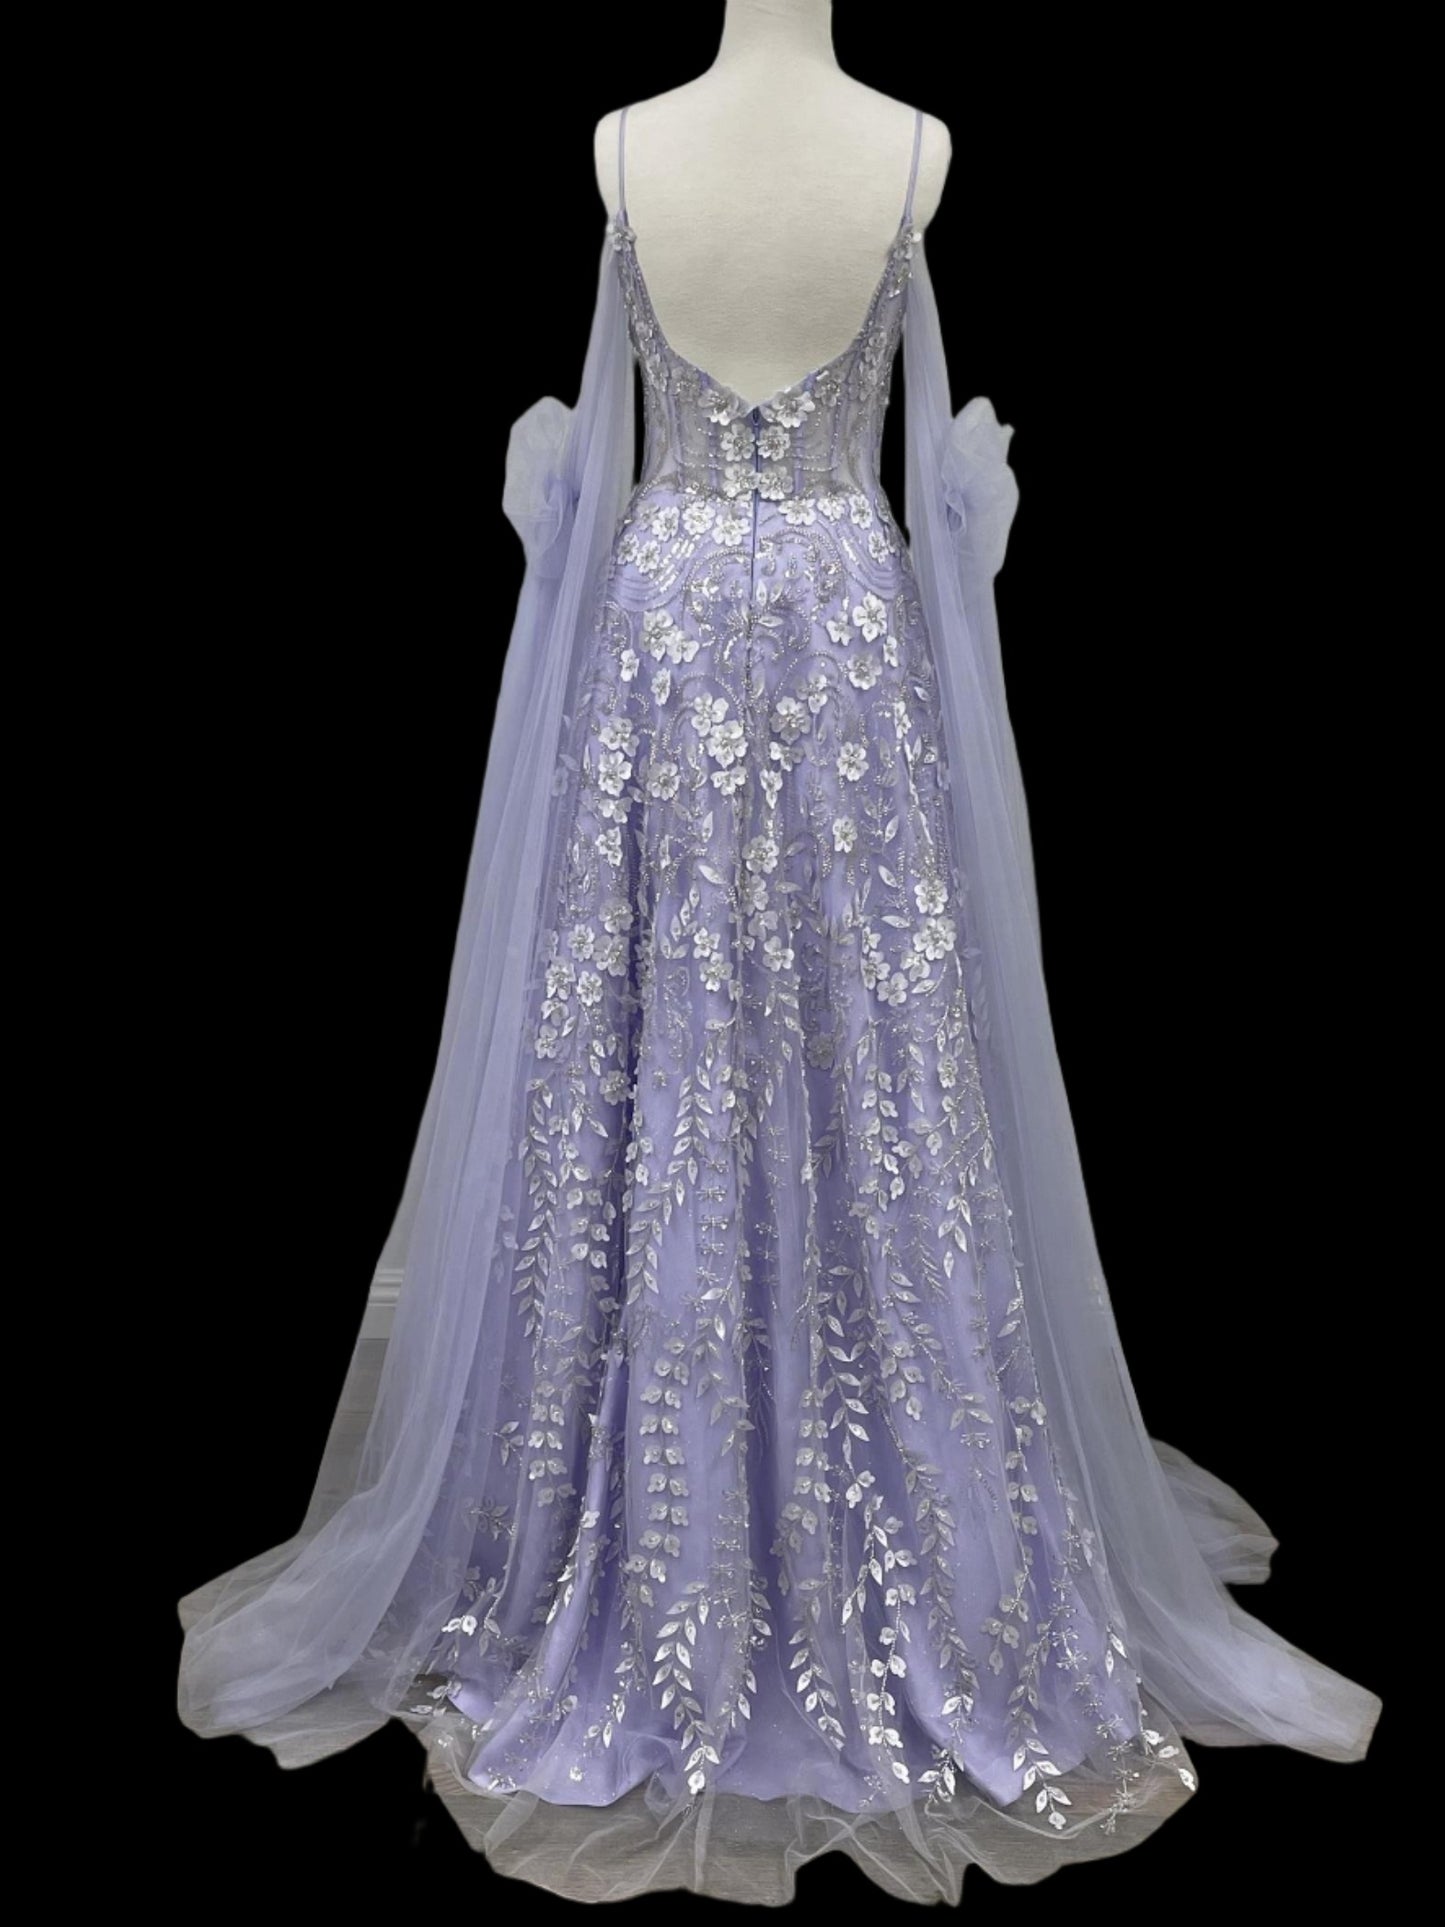 Elevate your formal wear with the Nox Anabel E1281 Sheer Corset Cape Formal Dress. The size 6 lilac dress features exquisite beadwork and a flattering A-line silhouette. The sheer corset top adds a touch of elegance, while the lace details complete the look. Perfect for any special occasion, this dress is a must-have for fashion-forward individuals. Scoop neck  Size: 6  Color: Lilac